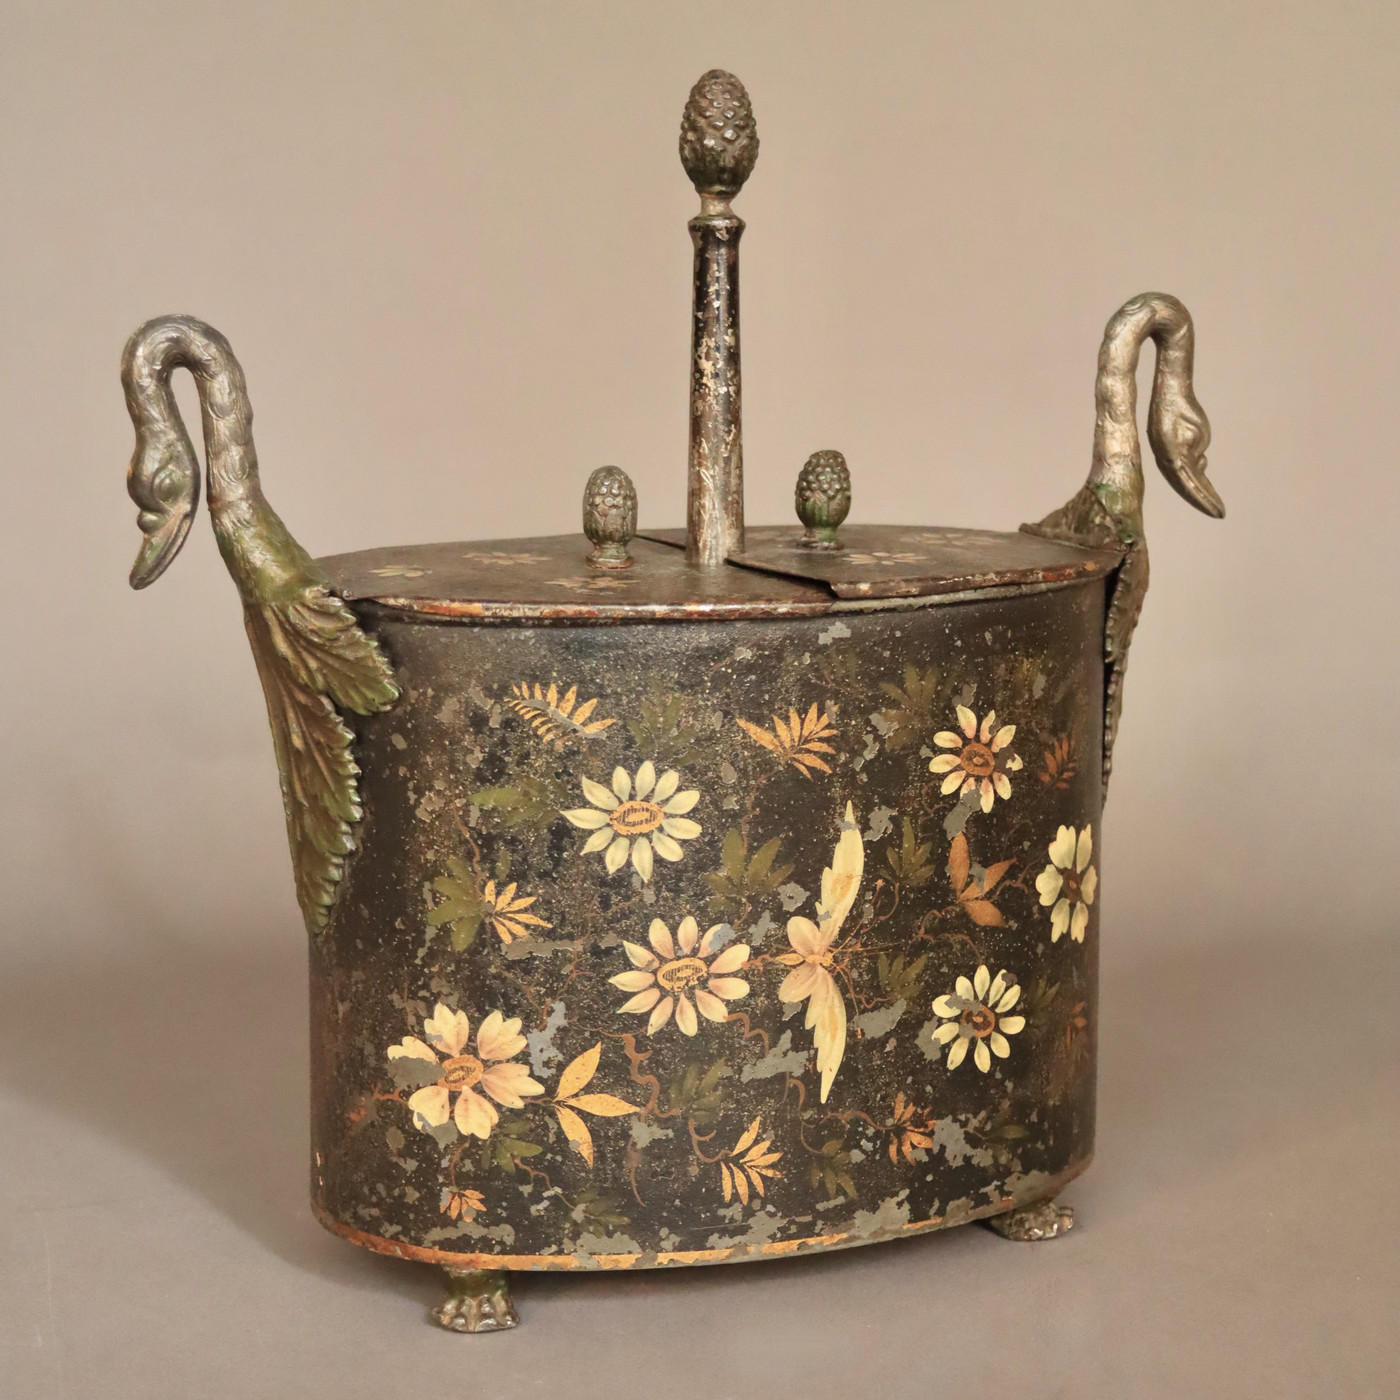 19th century cold painted iron egg basket